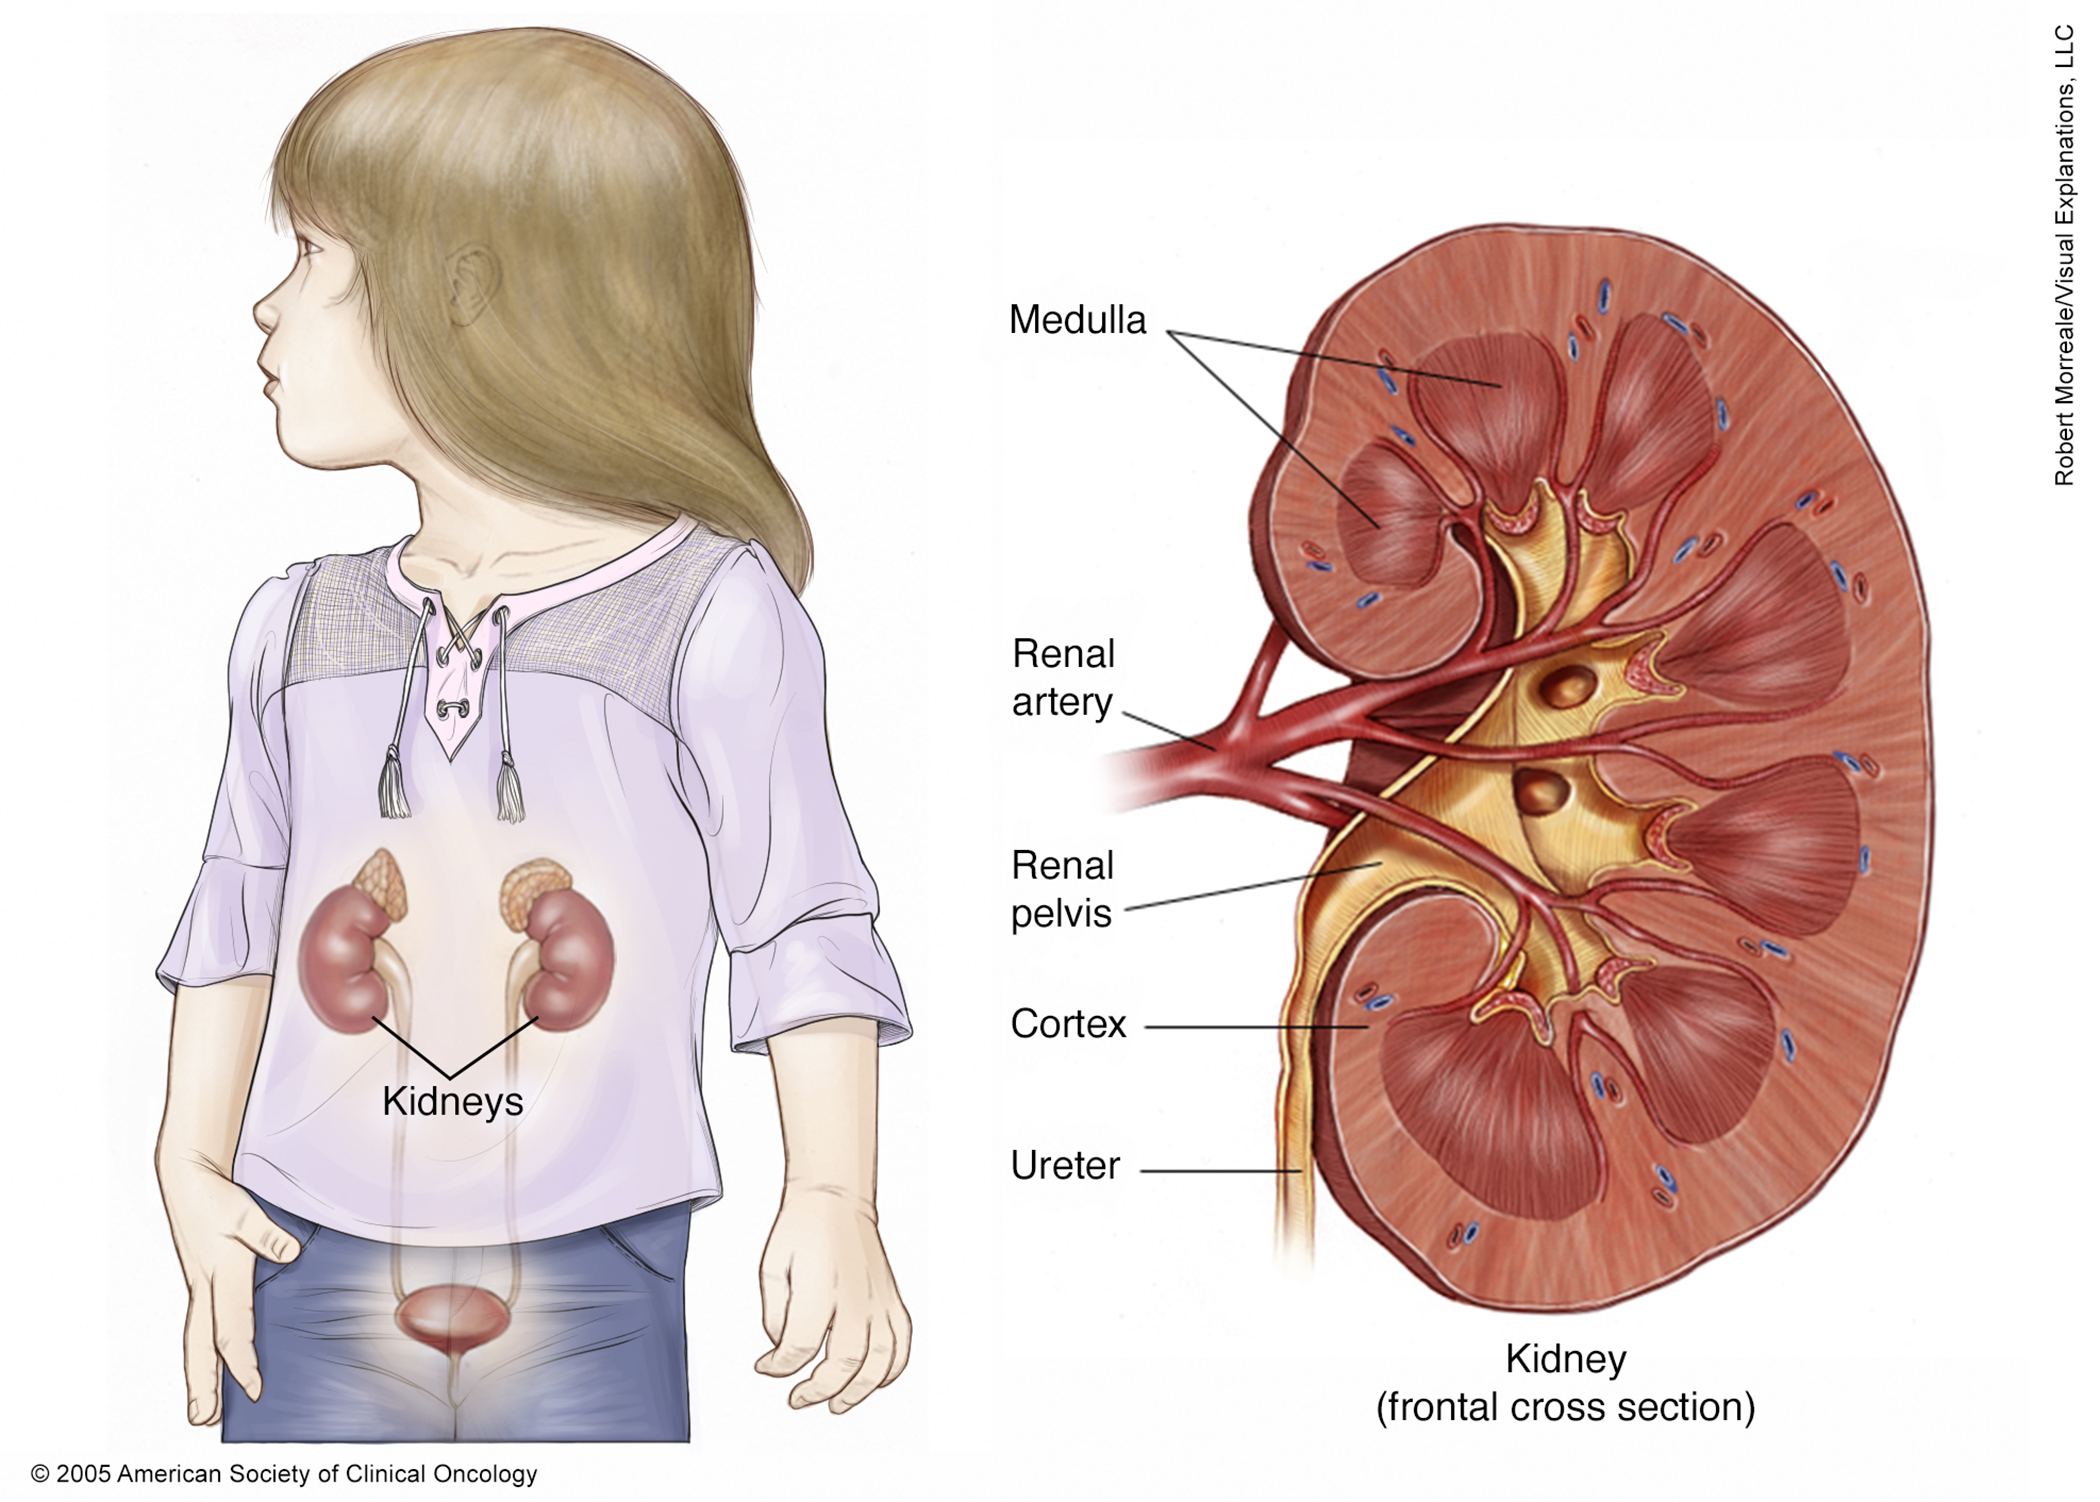 Illustration of the kidney of a child. See description for more information.